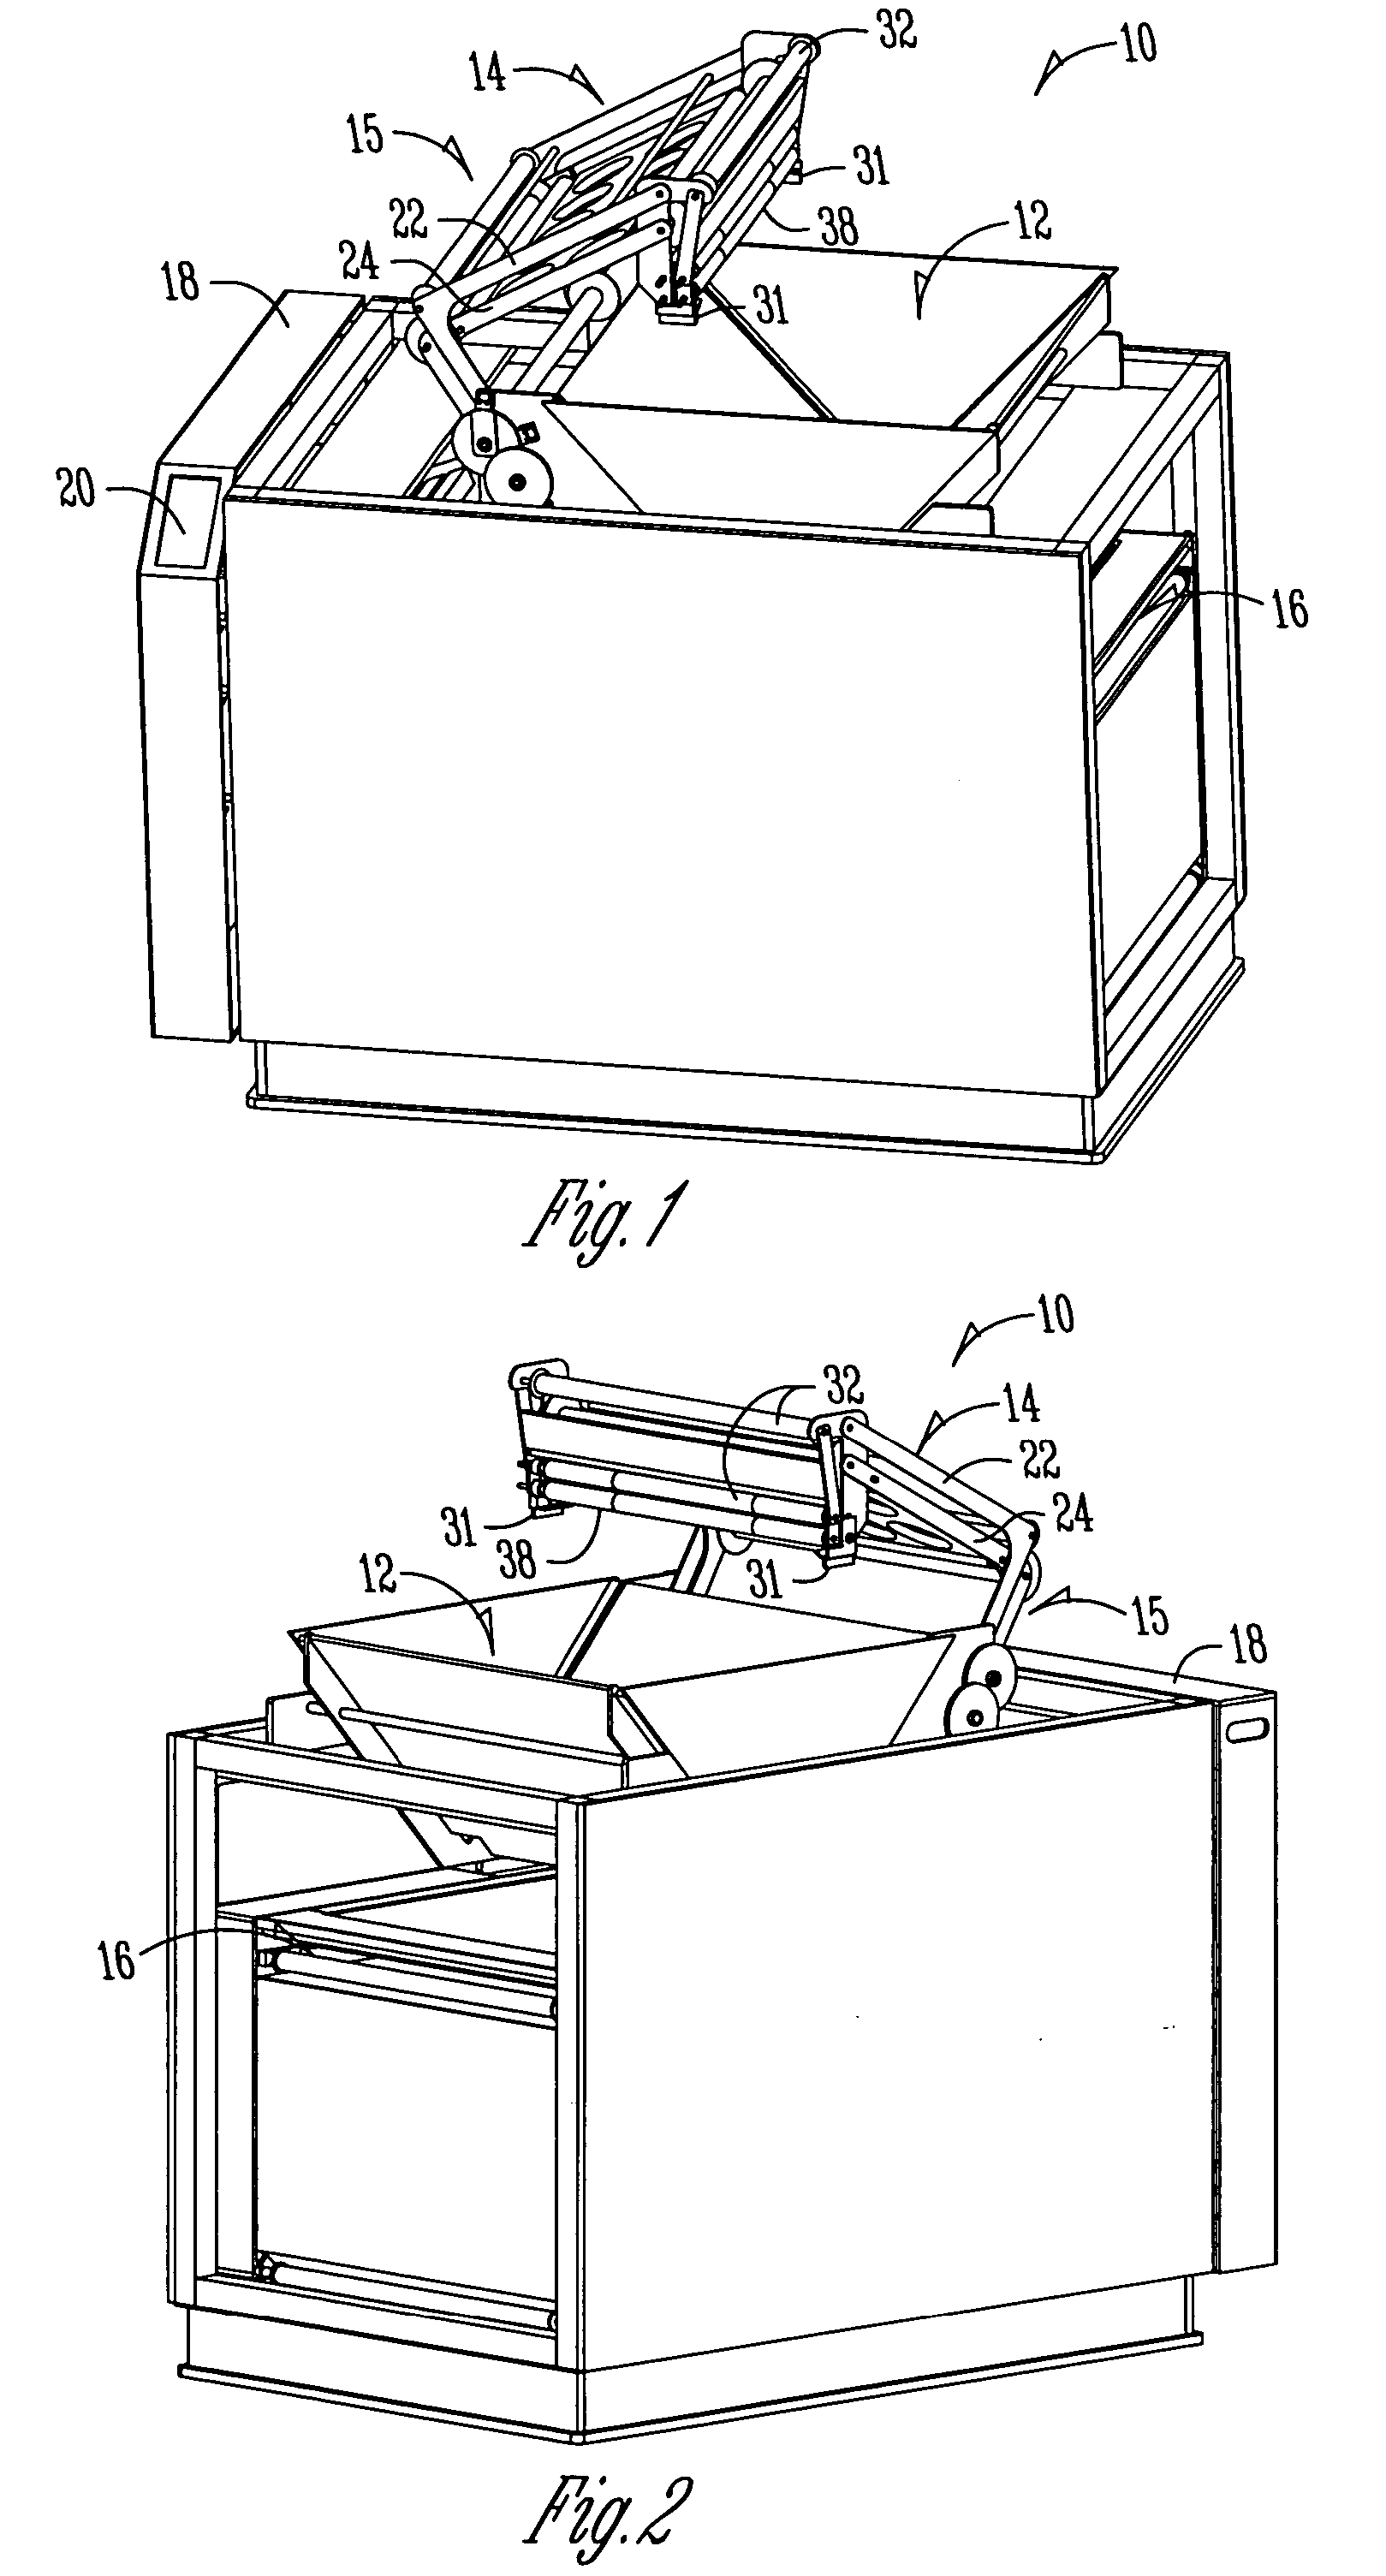 Continuous laundry cleaning appliance